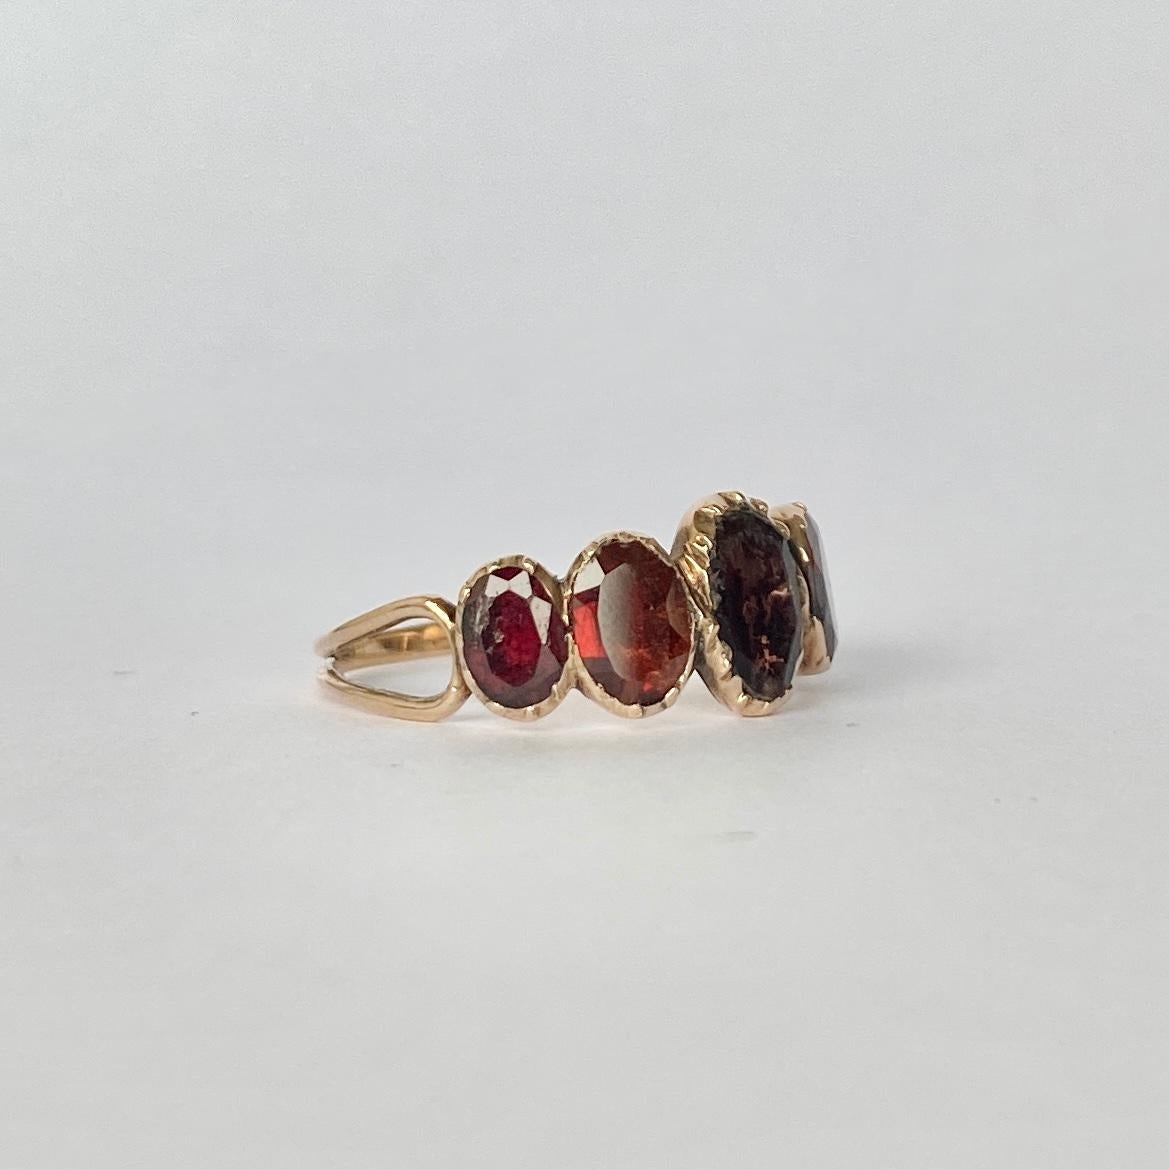 The gorgeous georgian flat cut garnets in this band are a wonderful large size. When wearing the band it has a lovely chunky look to it and also looks as though it could be a full eternity band. The shoulders have an open look which come together on